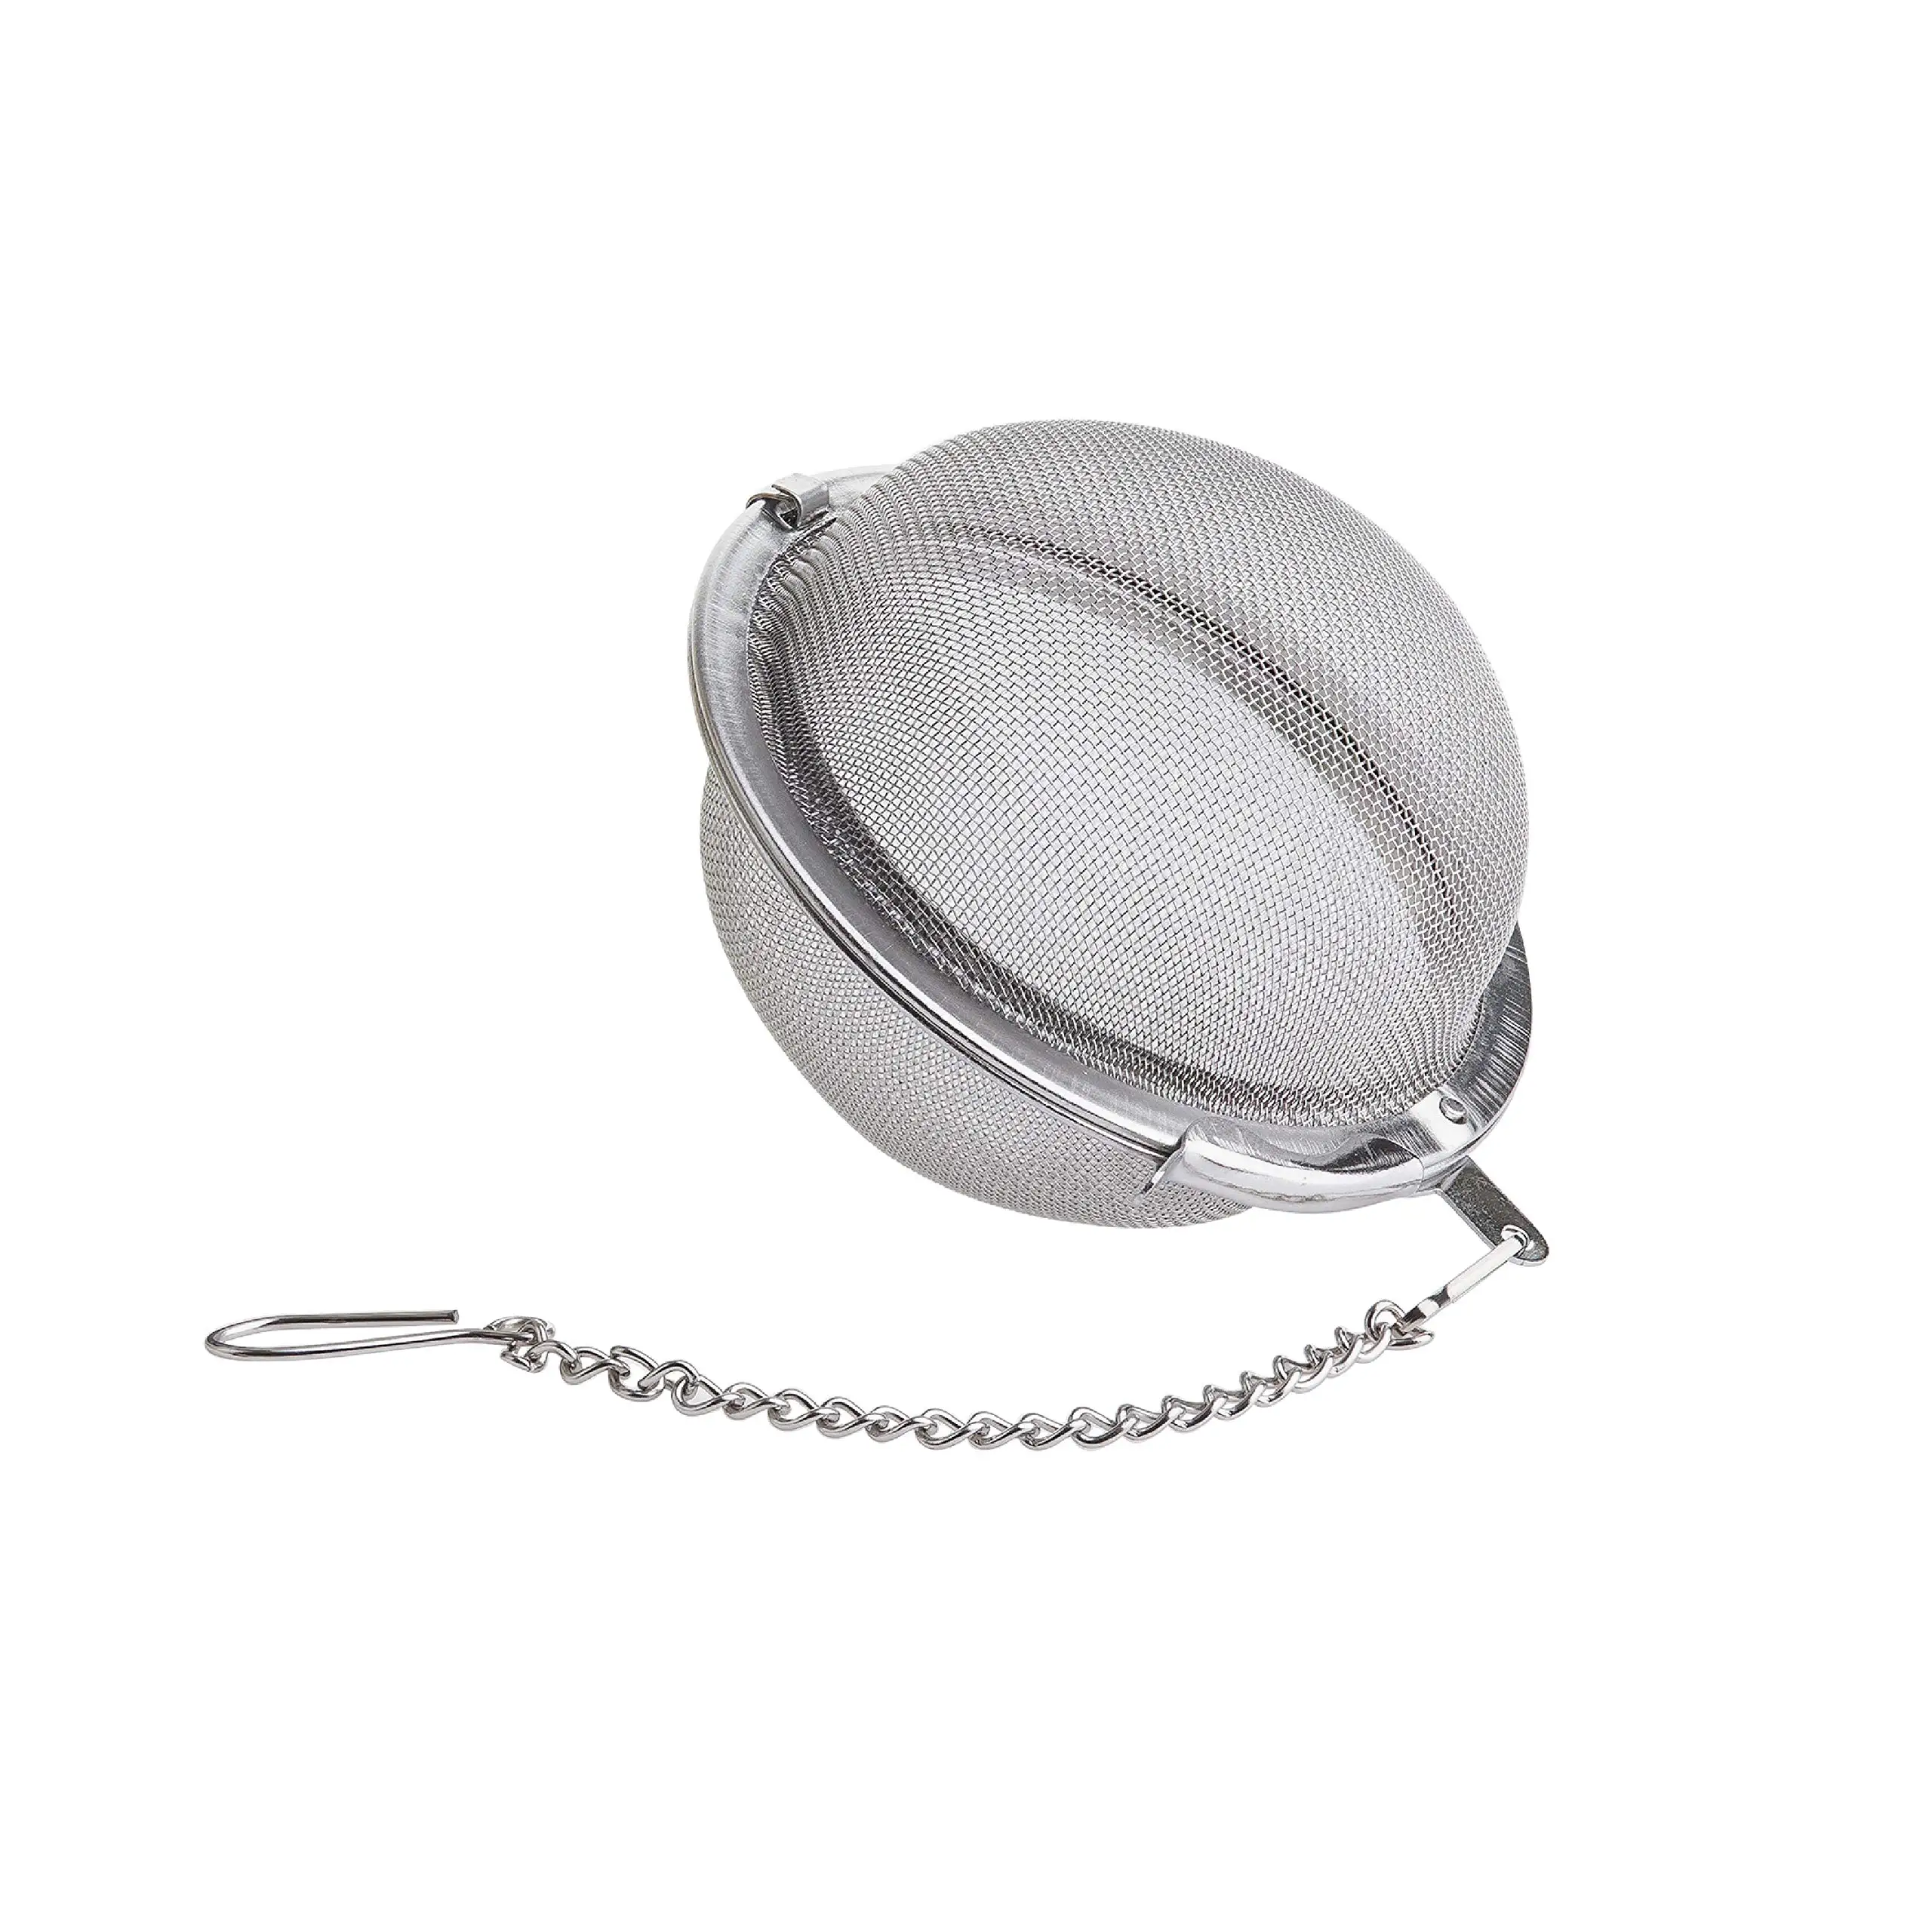 Stainless Steel Tea Spice Ball Mesh Infuser Tea Handle Filter Strainer Diffuser 